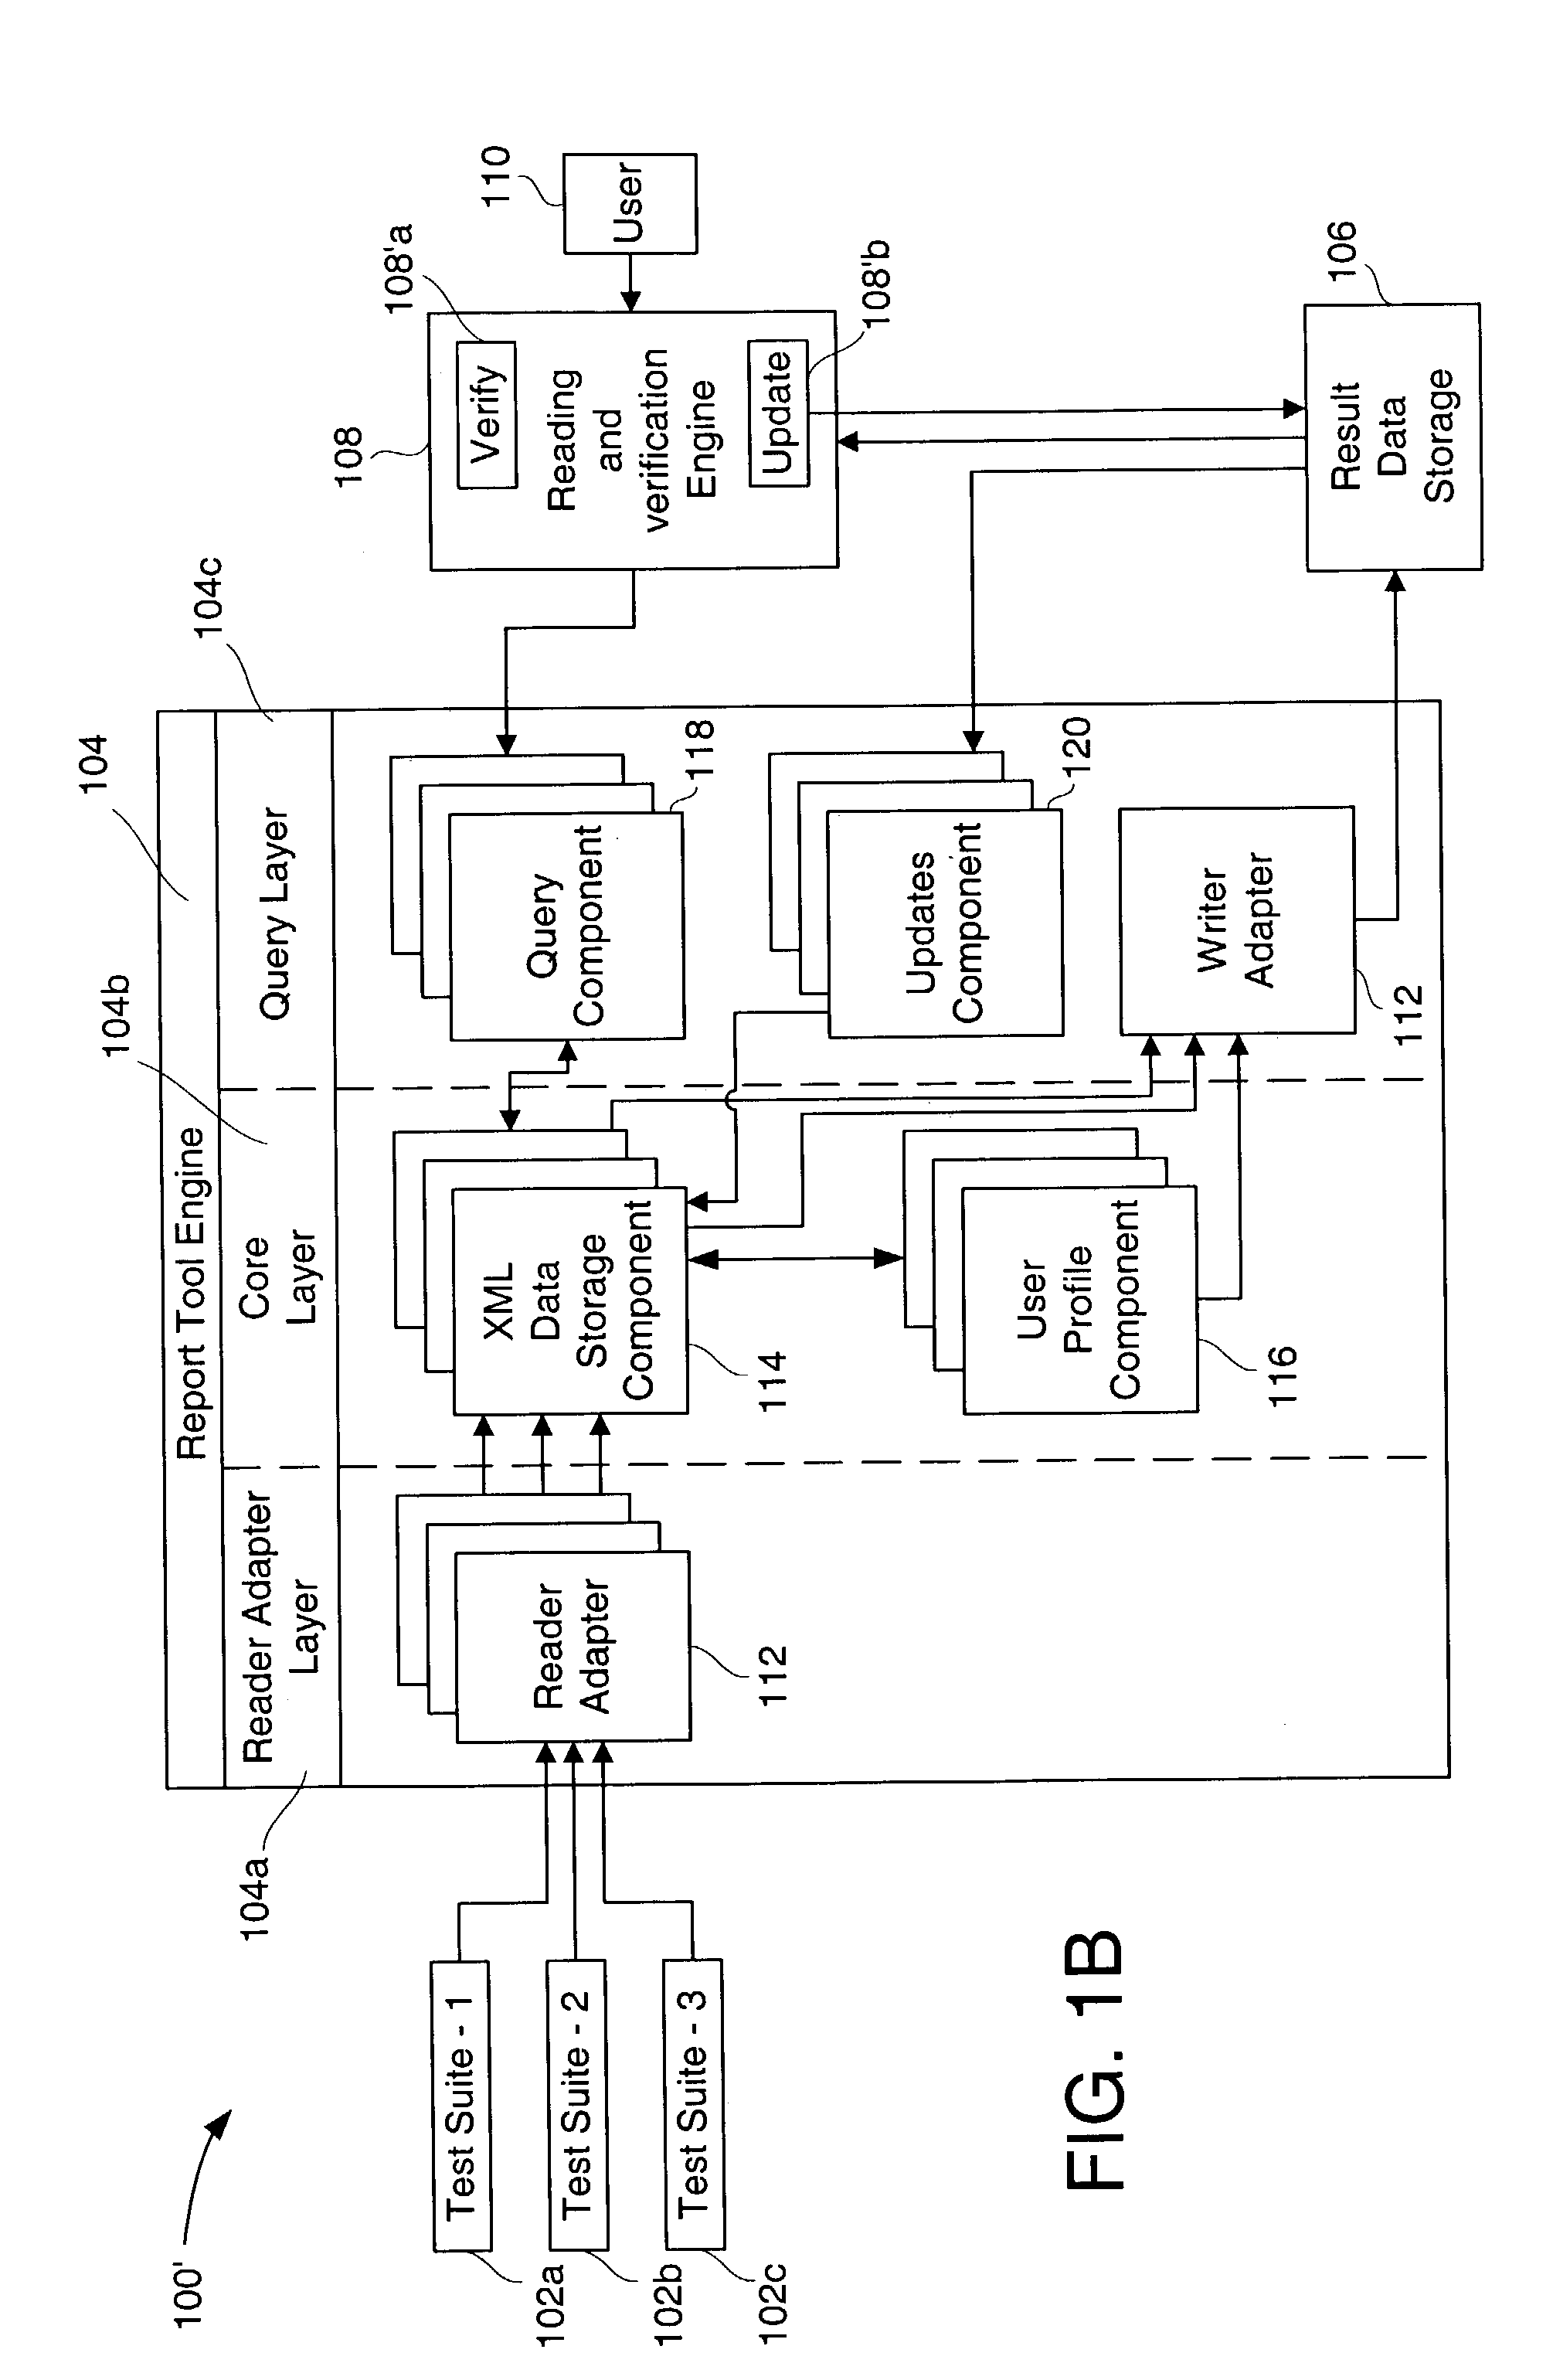 Method and system for reporting standardized and verified data